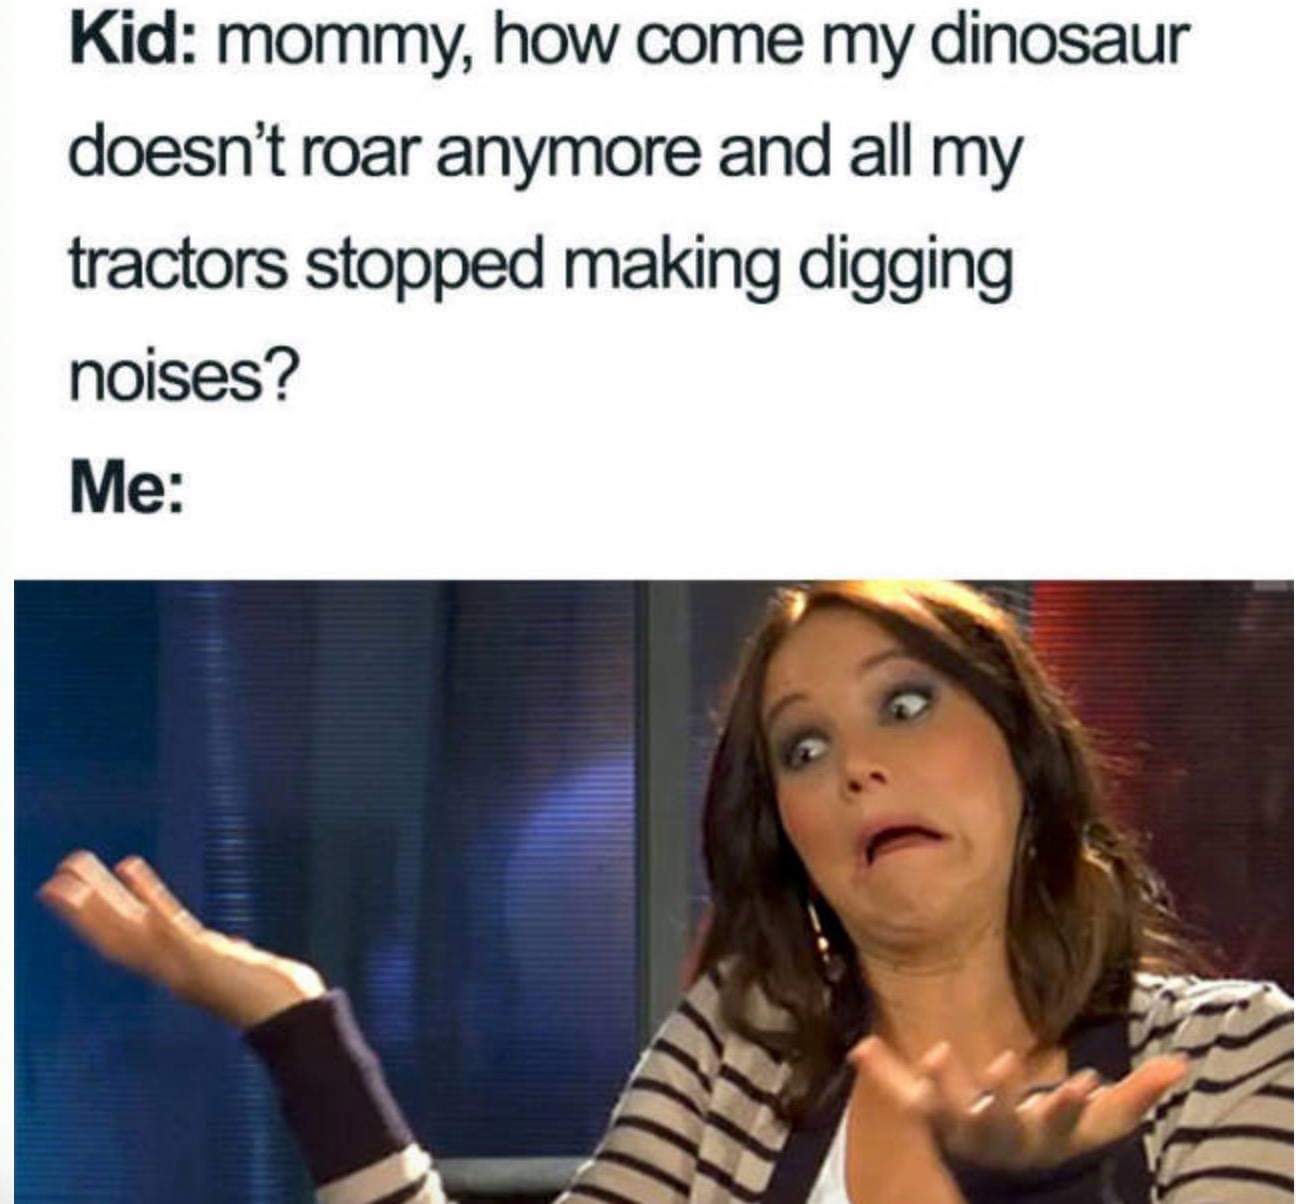 parenting memes - Kid mommy, how come my dinosaur doesn't roar anymore and all my tractors stopped making digging noises? Me